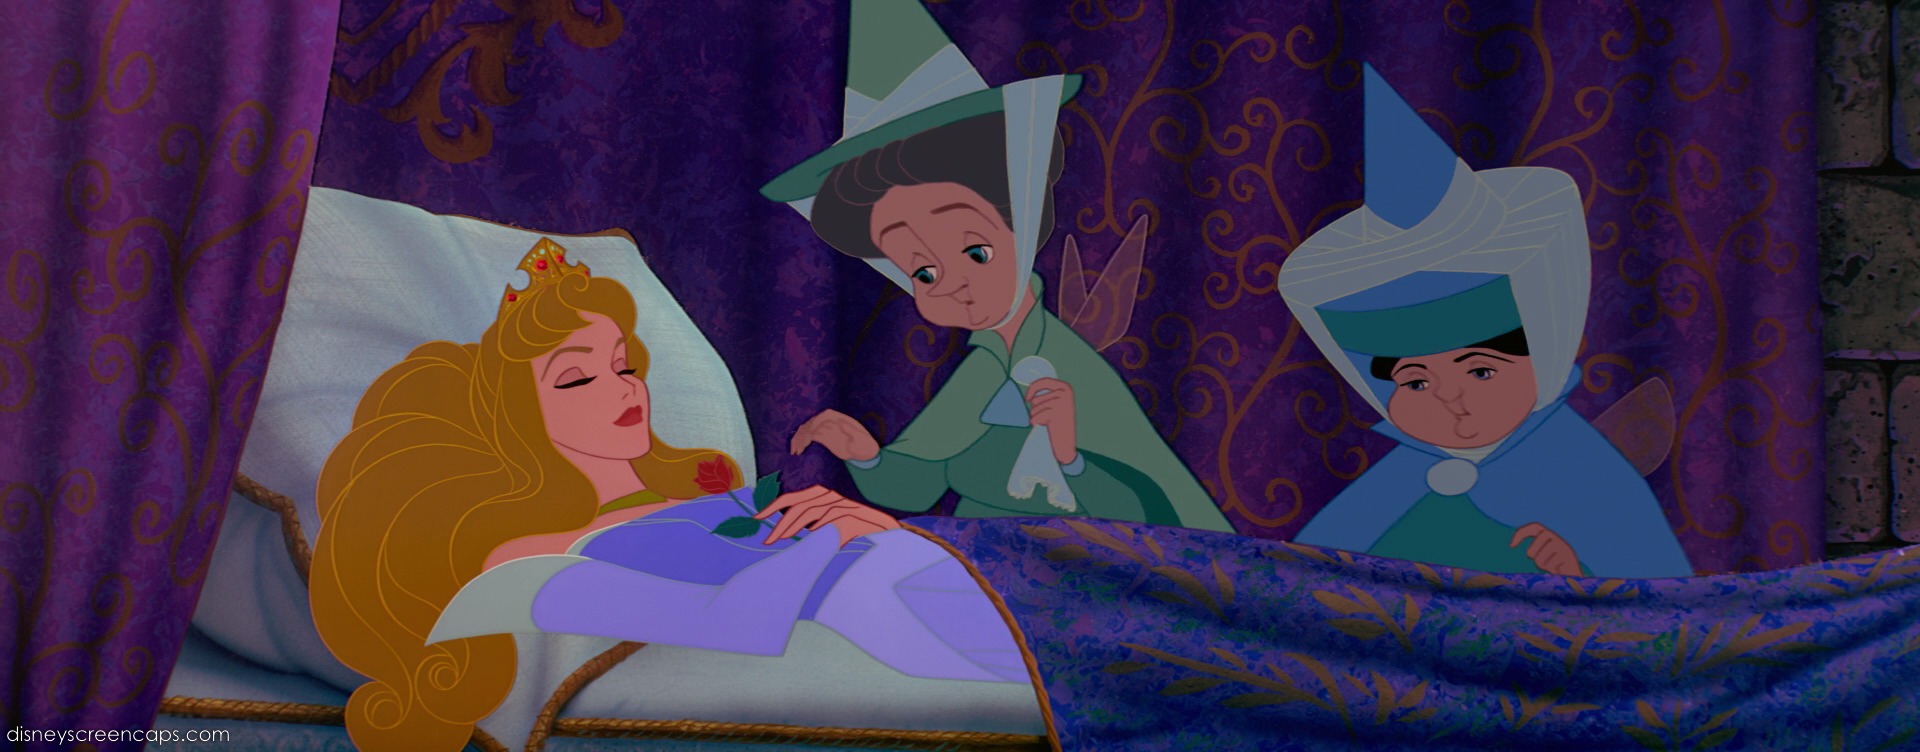 Sleeping Beauty Only Has 18 Lines In The Whole Movie - Sleeping Beauty In Bed - HD Wallpaper 